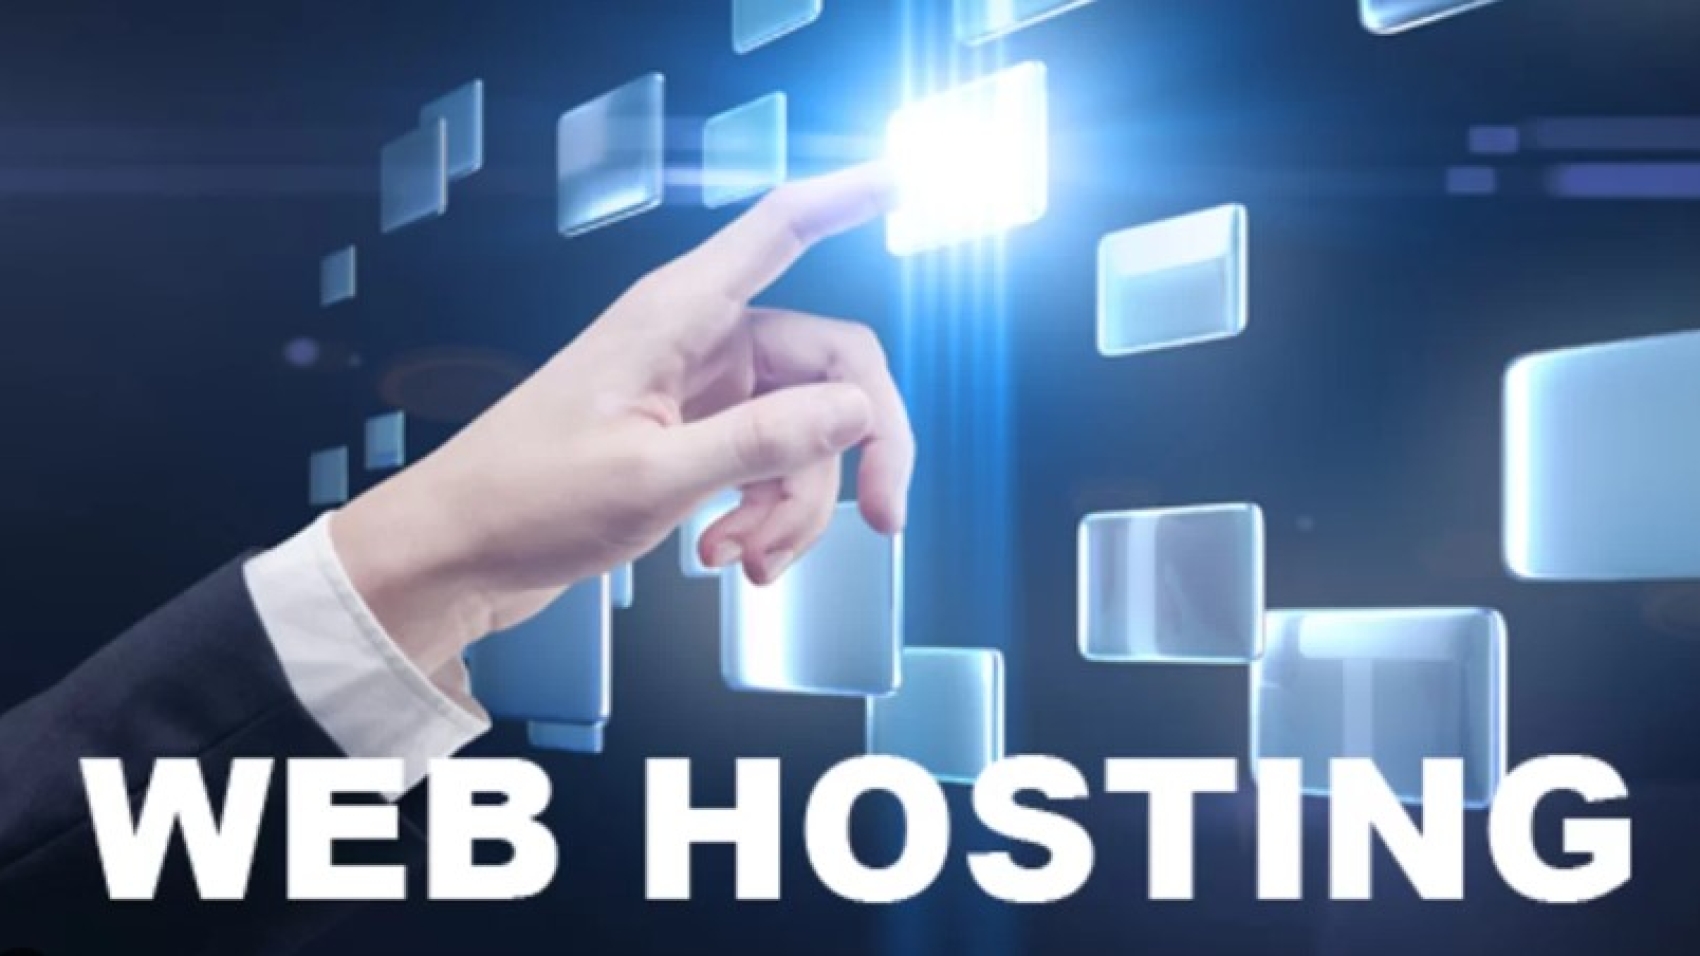 The importance of a dedicated Hosting company